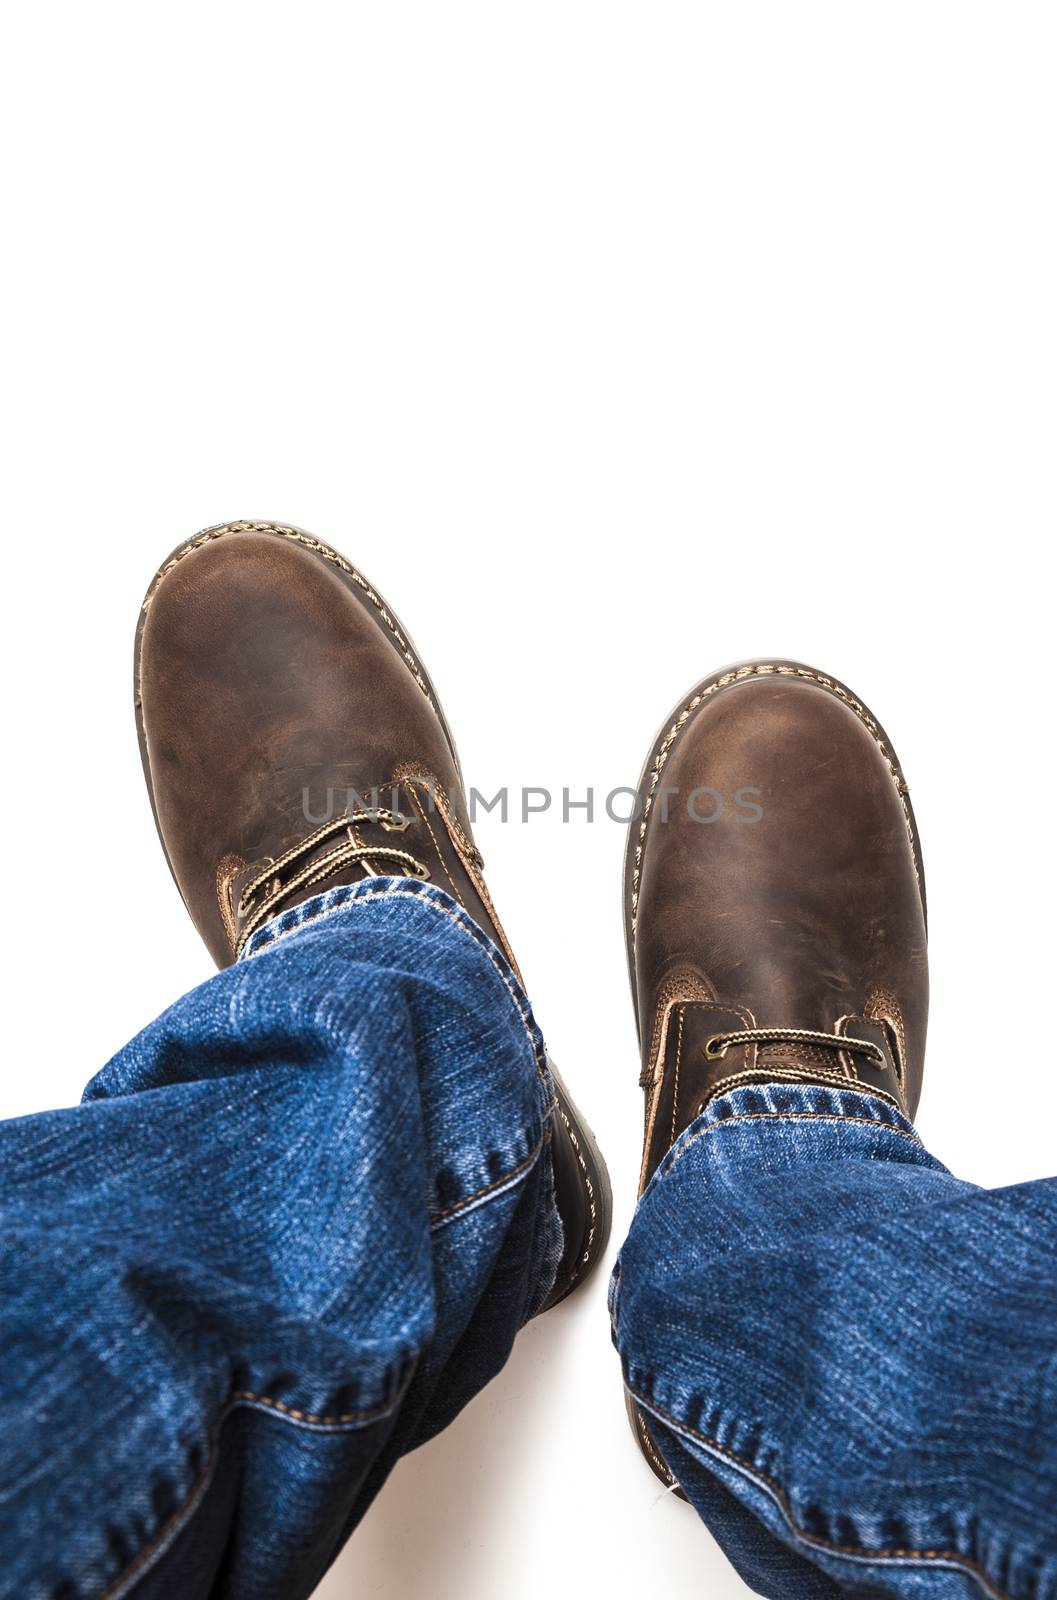 Men's brown boots and blue jeans. Isolated on white bacground